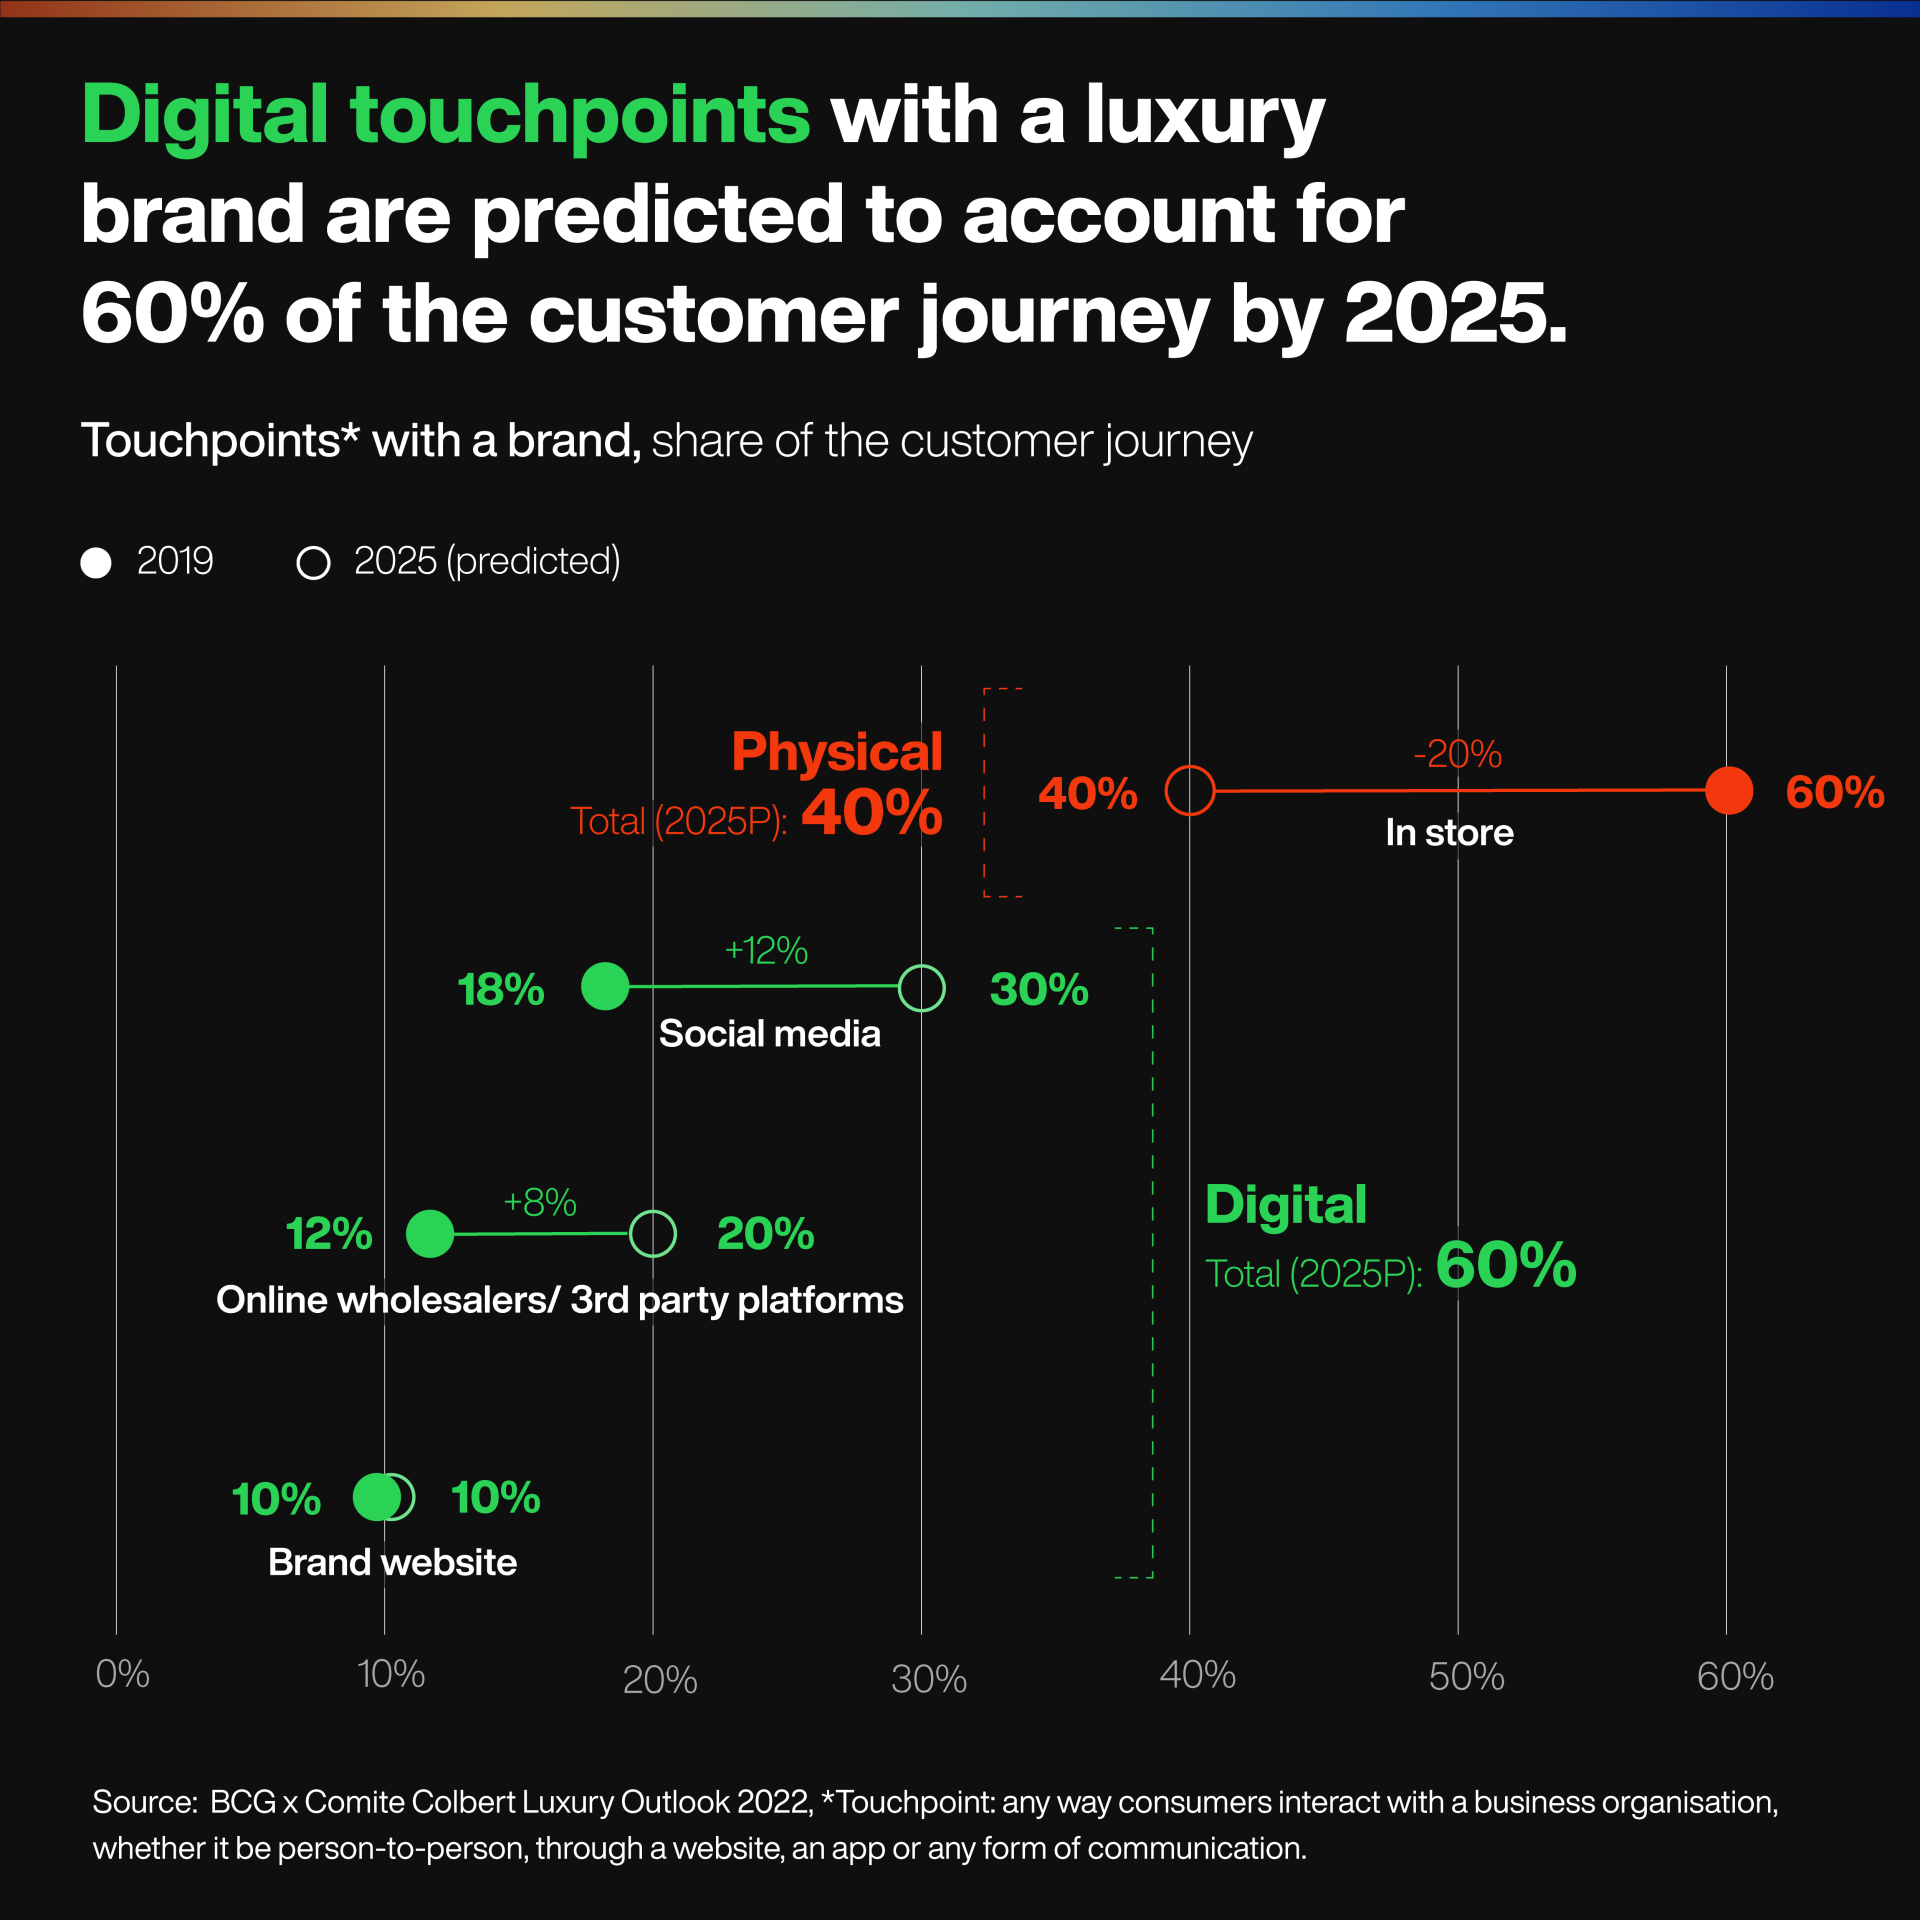 Digital Touchpoints